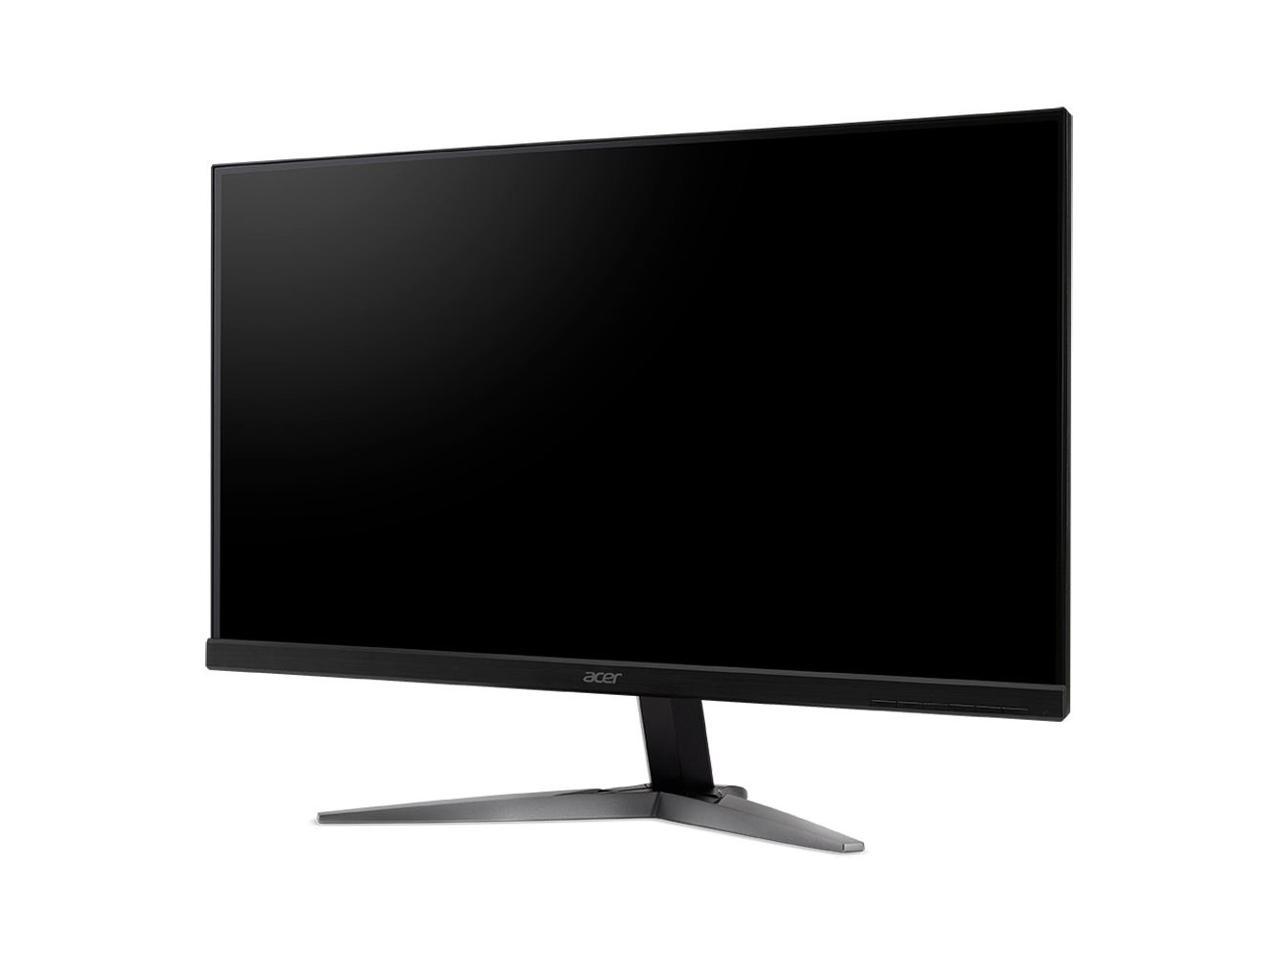 Acer 27" Widescreen LED Monitor Full HD 144Hz 1ms